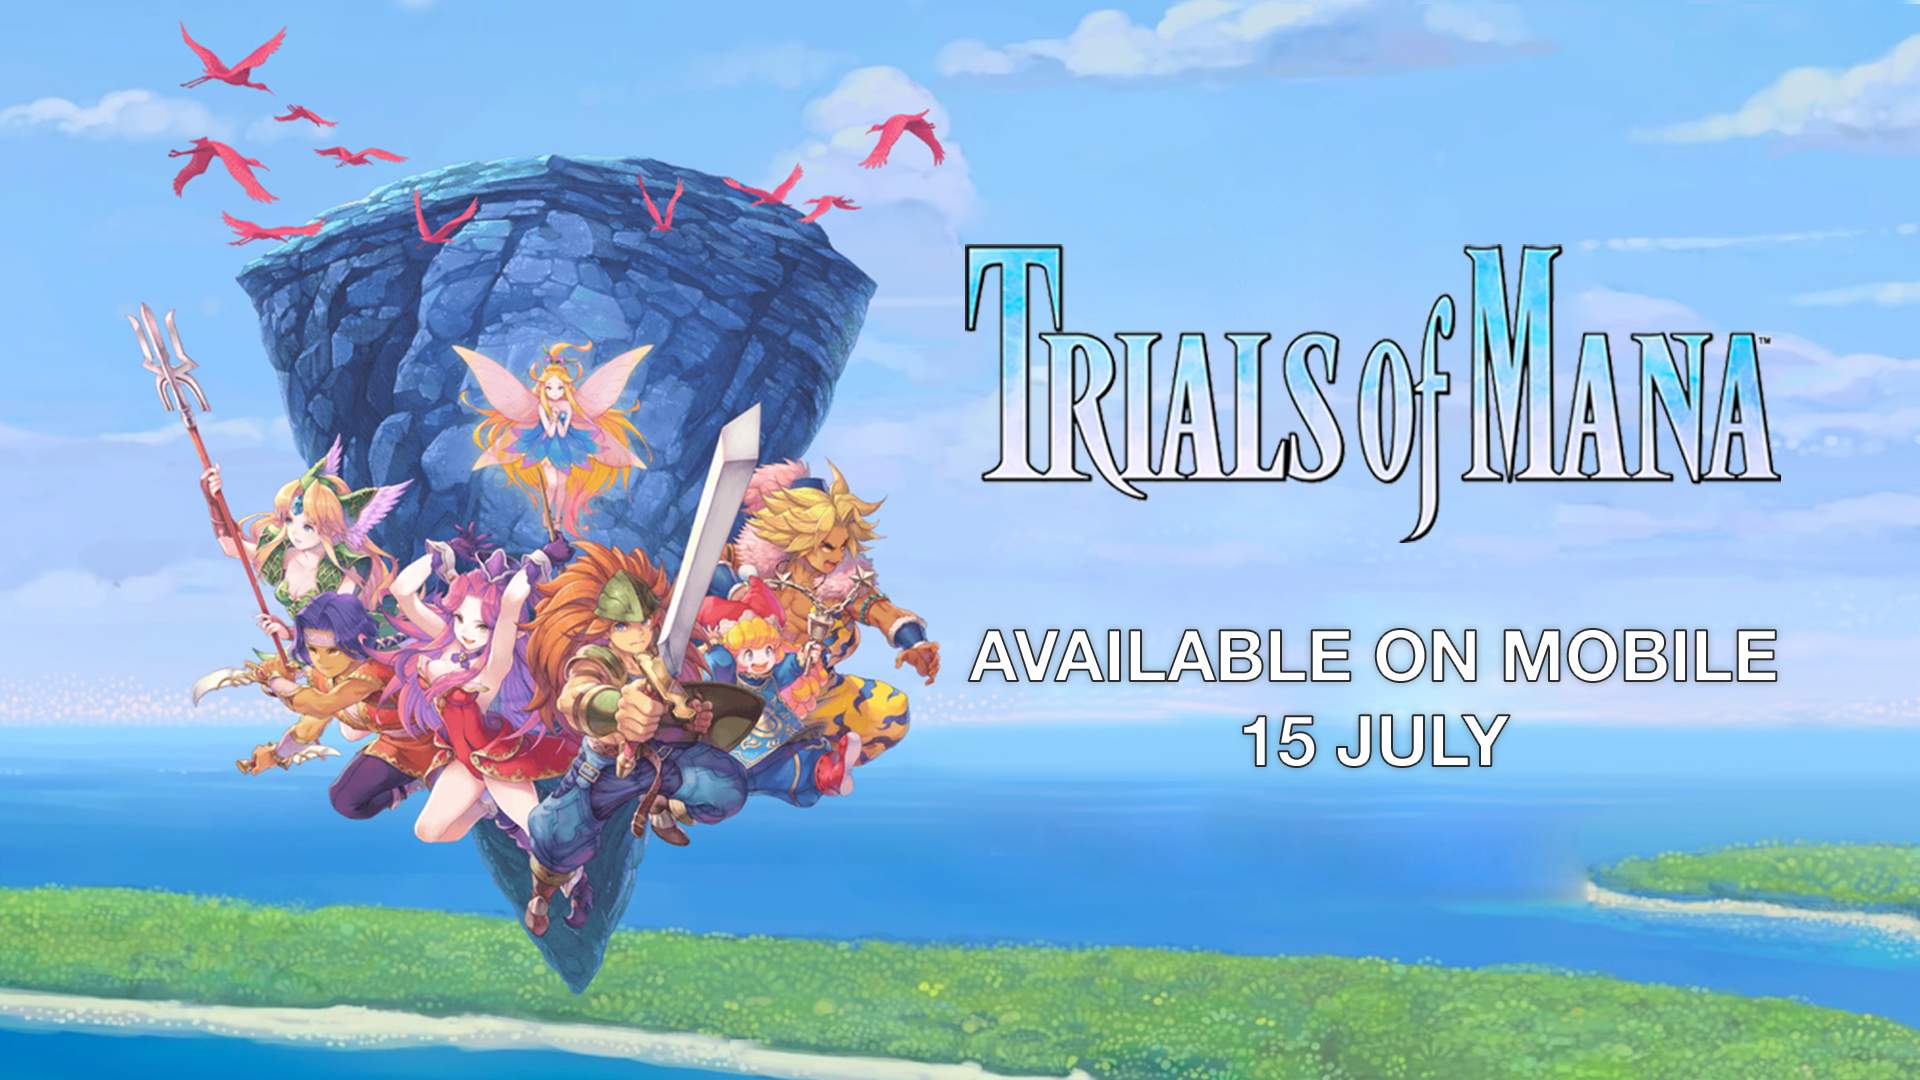 Trials of Mana | AVAILABLE ON MOBILE 15 JULY 2021